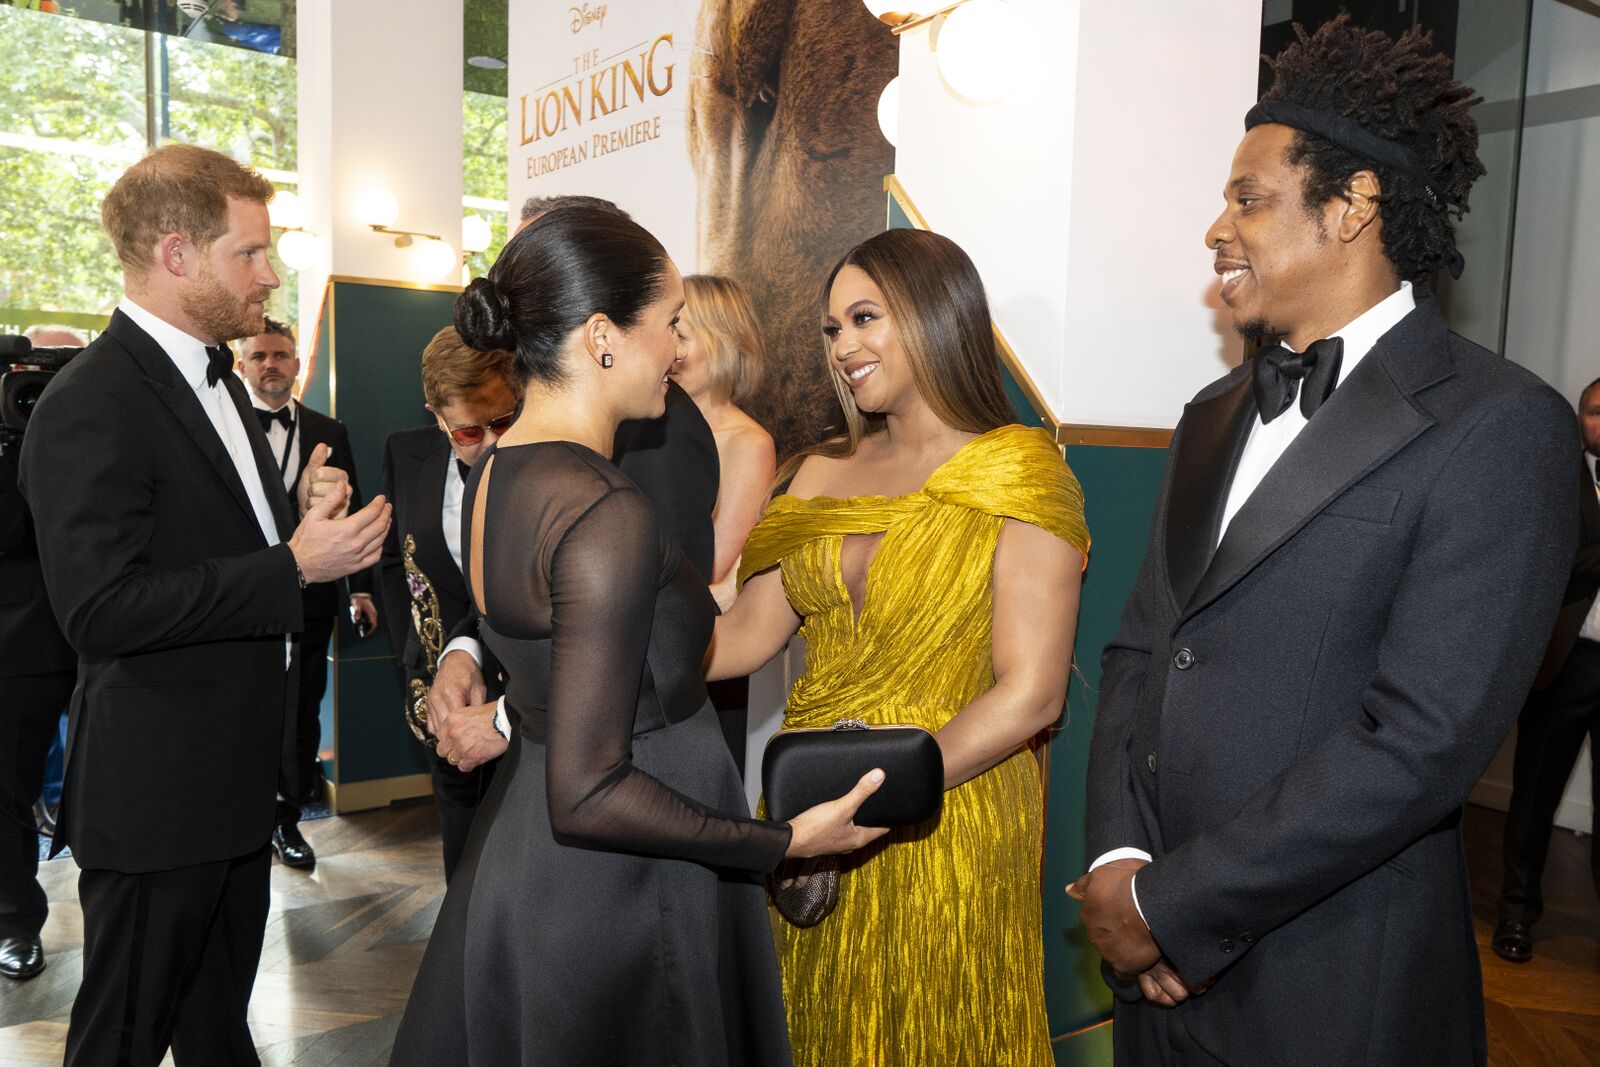 Beyonce and Jay-Z greeting the Duke and Duchess of Sussex at the "Lion King" European Premiere | Source: Getty Images/GlobalImagesUkraine